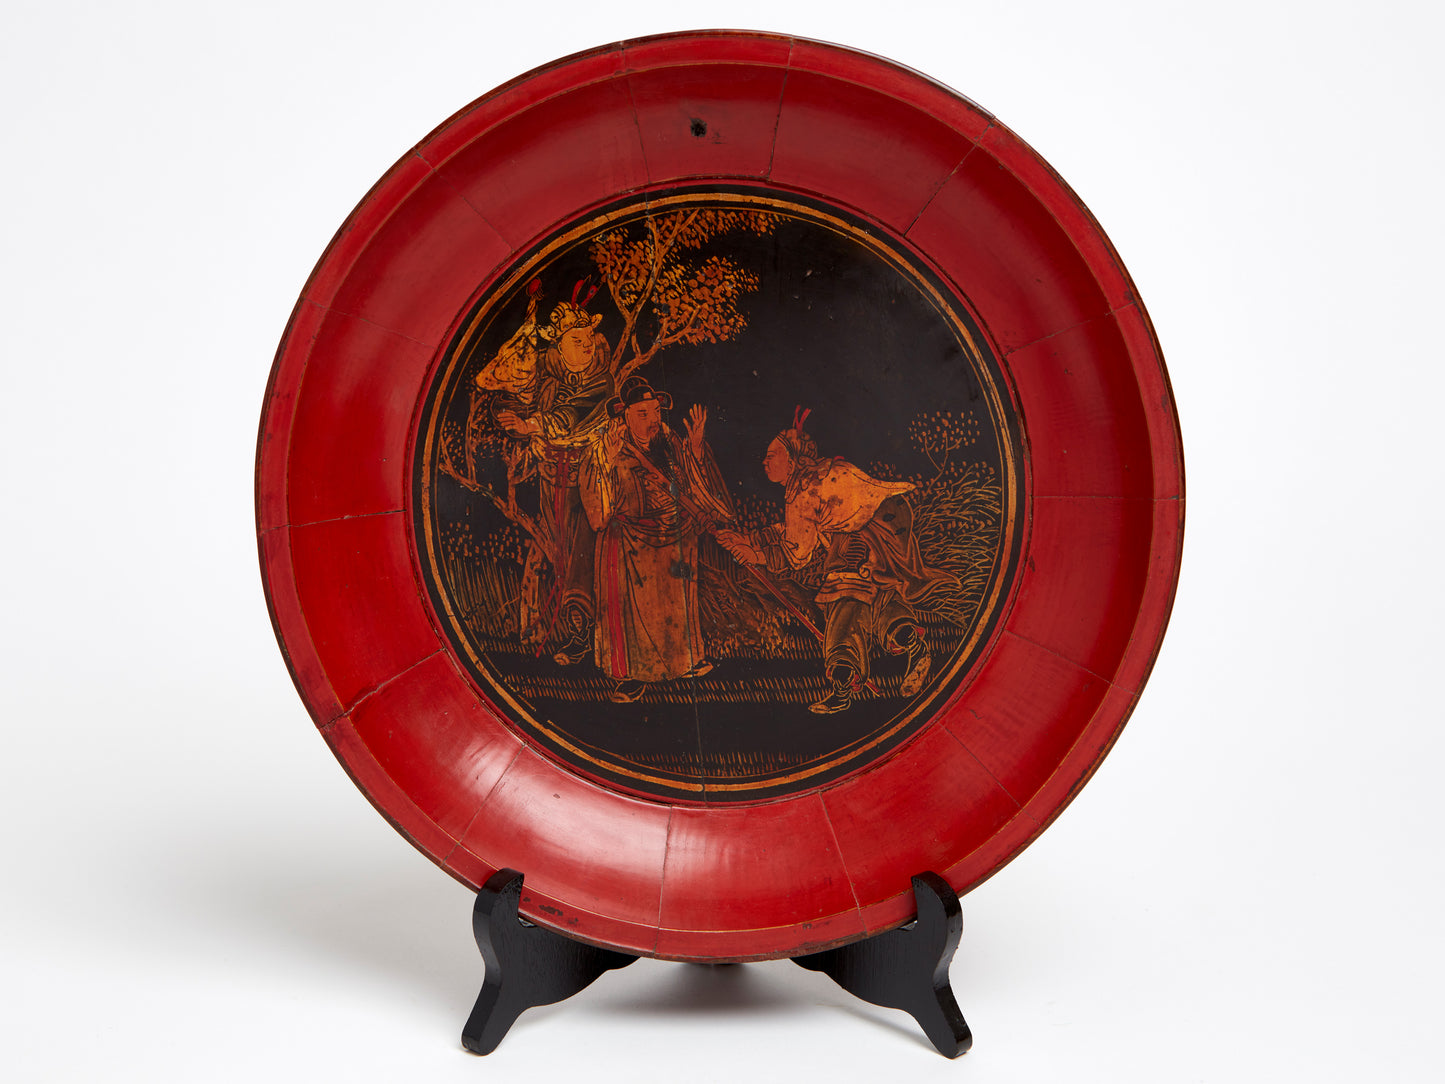 AN EARLY 20th CENTURY JAPANESE LACQUER WOOD PLATE